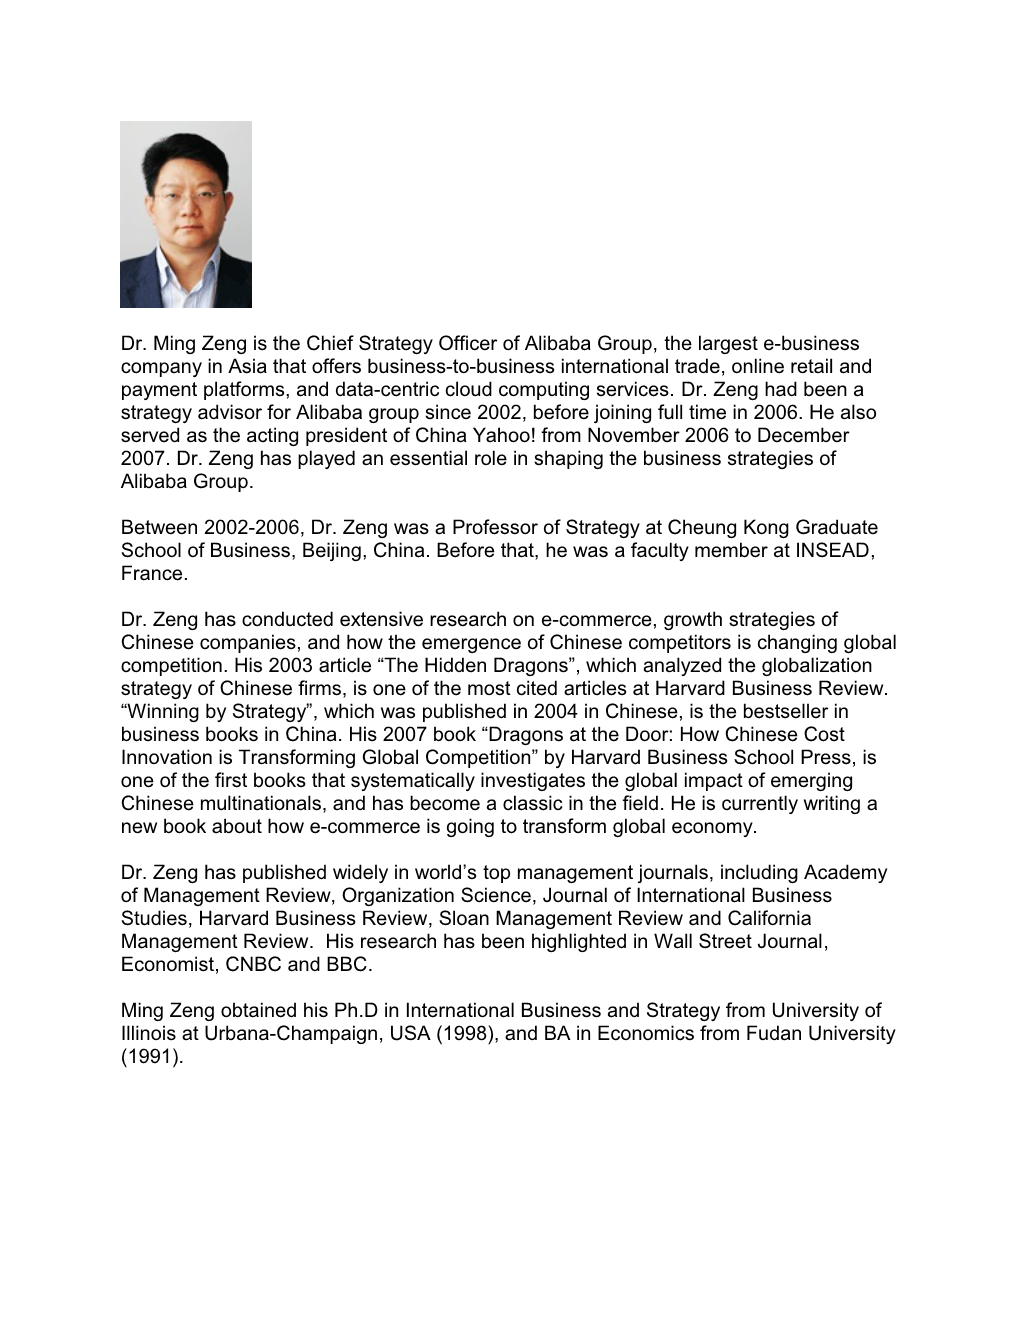 Professor Ming Zeng Is Teaching at INSEAD, One of the Leading International Business Schools